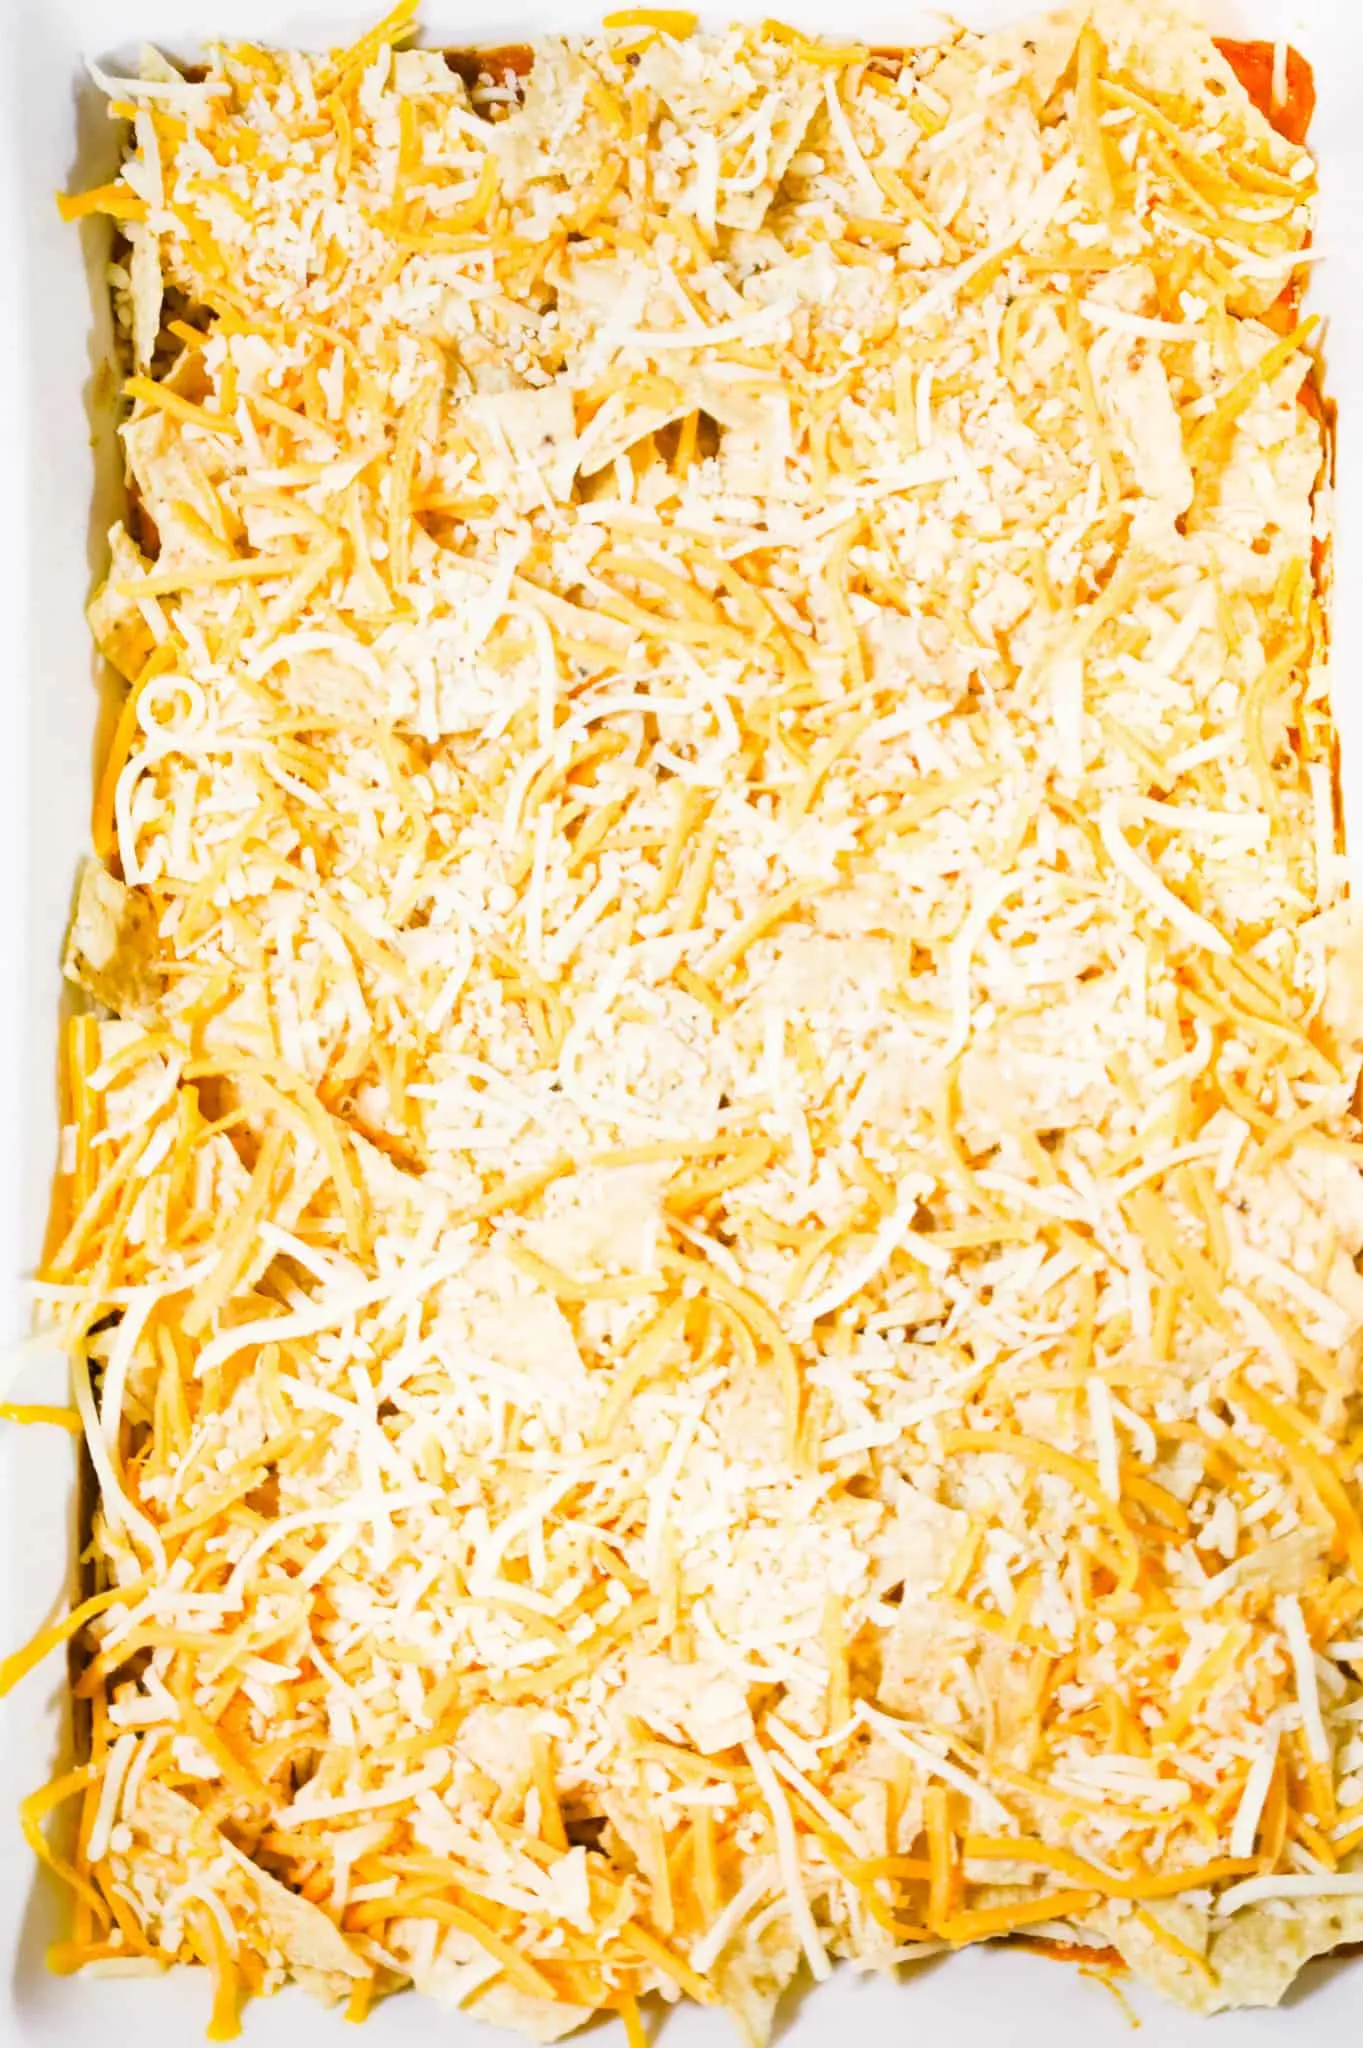 shredded cheese on top of crumbled tortilla chips in a baking dish